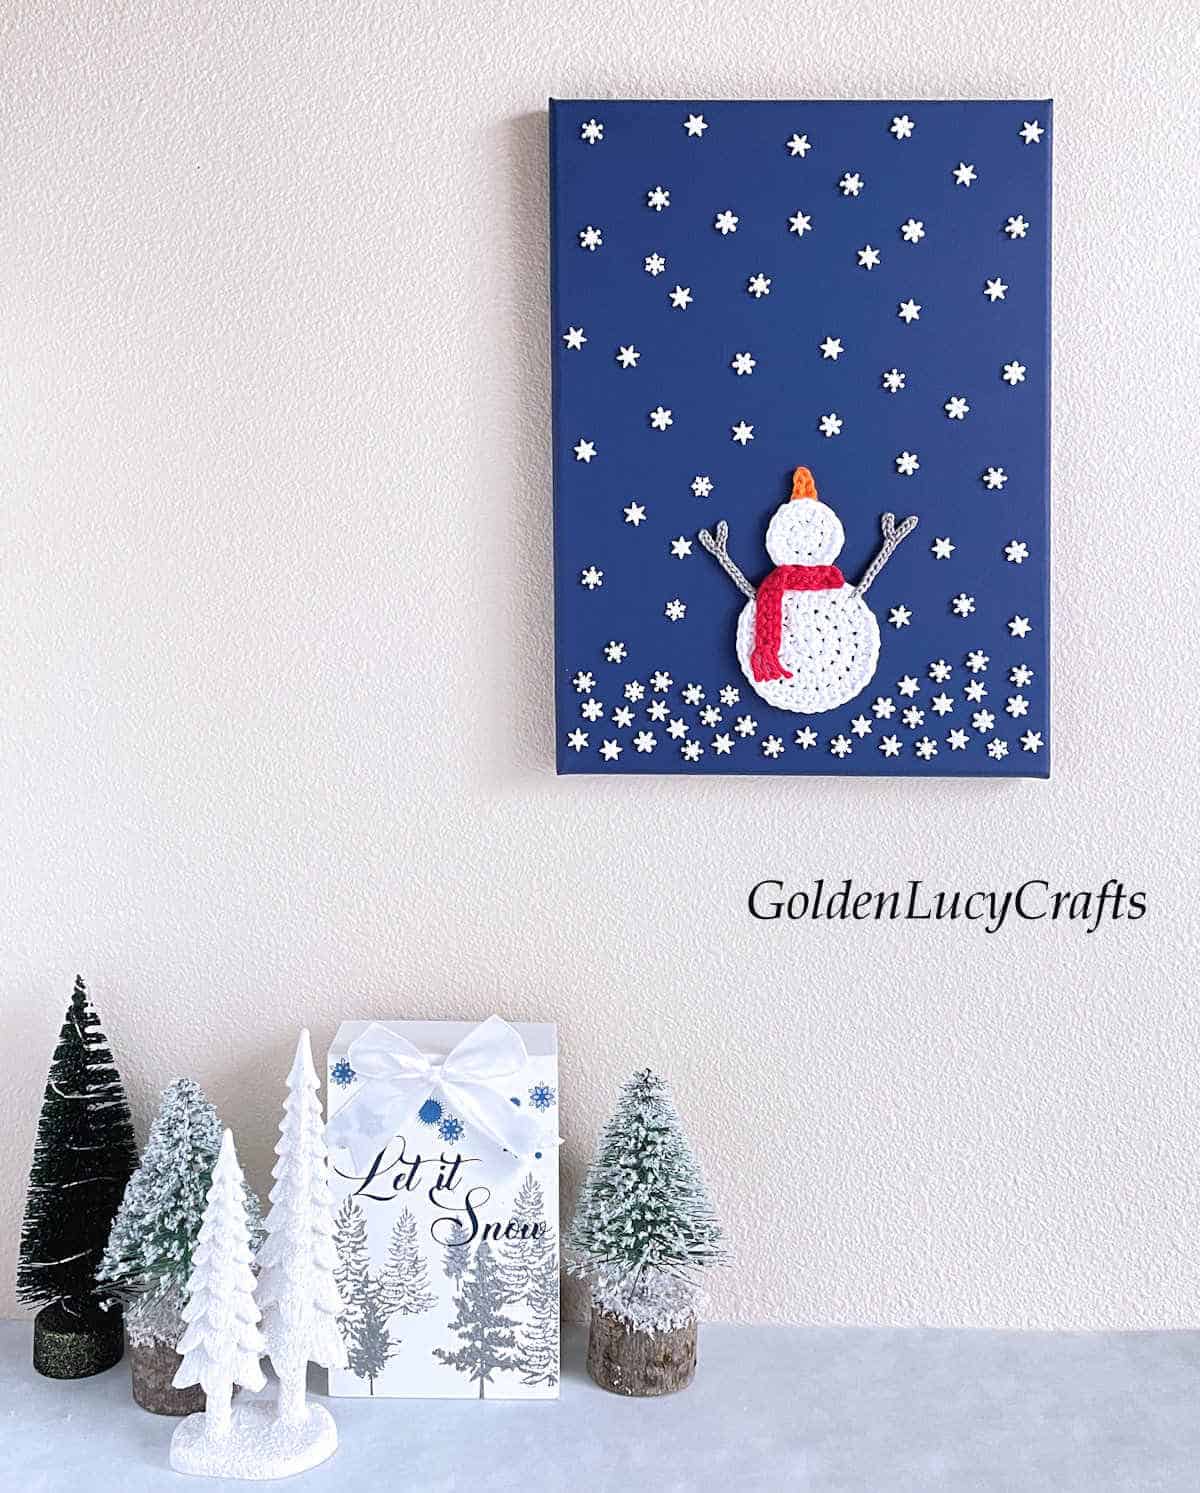 Snowman catching snowflakes crochet art hanging on the wall.